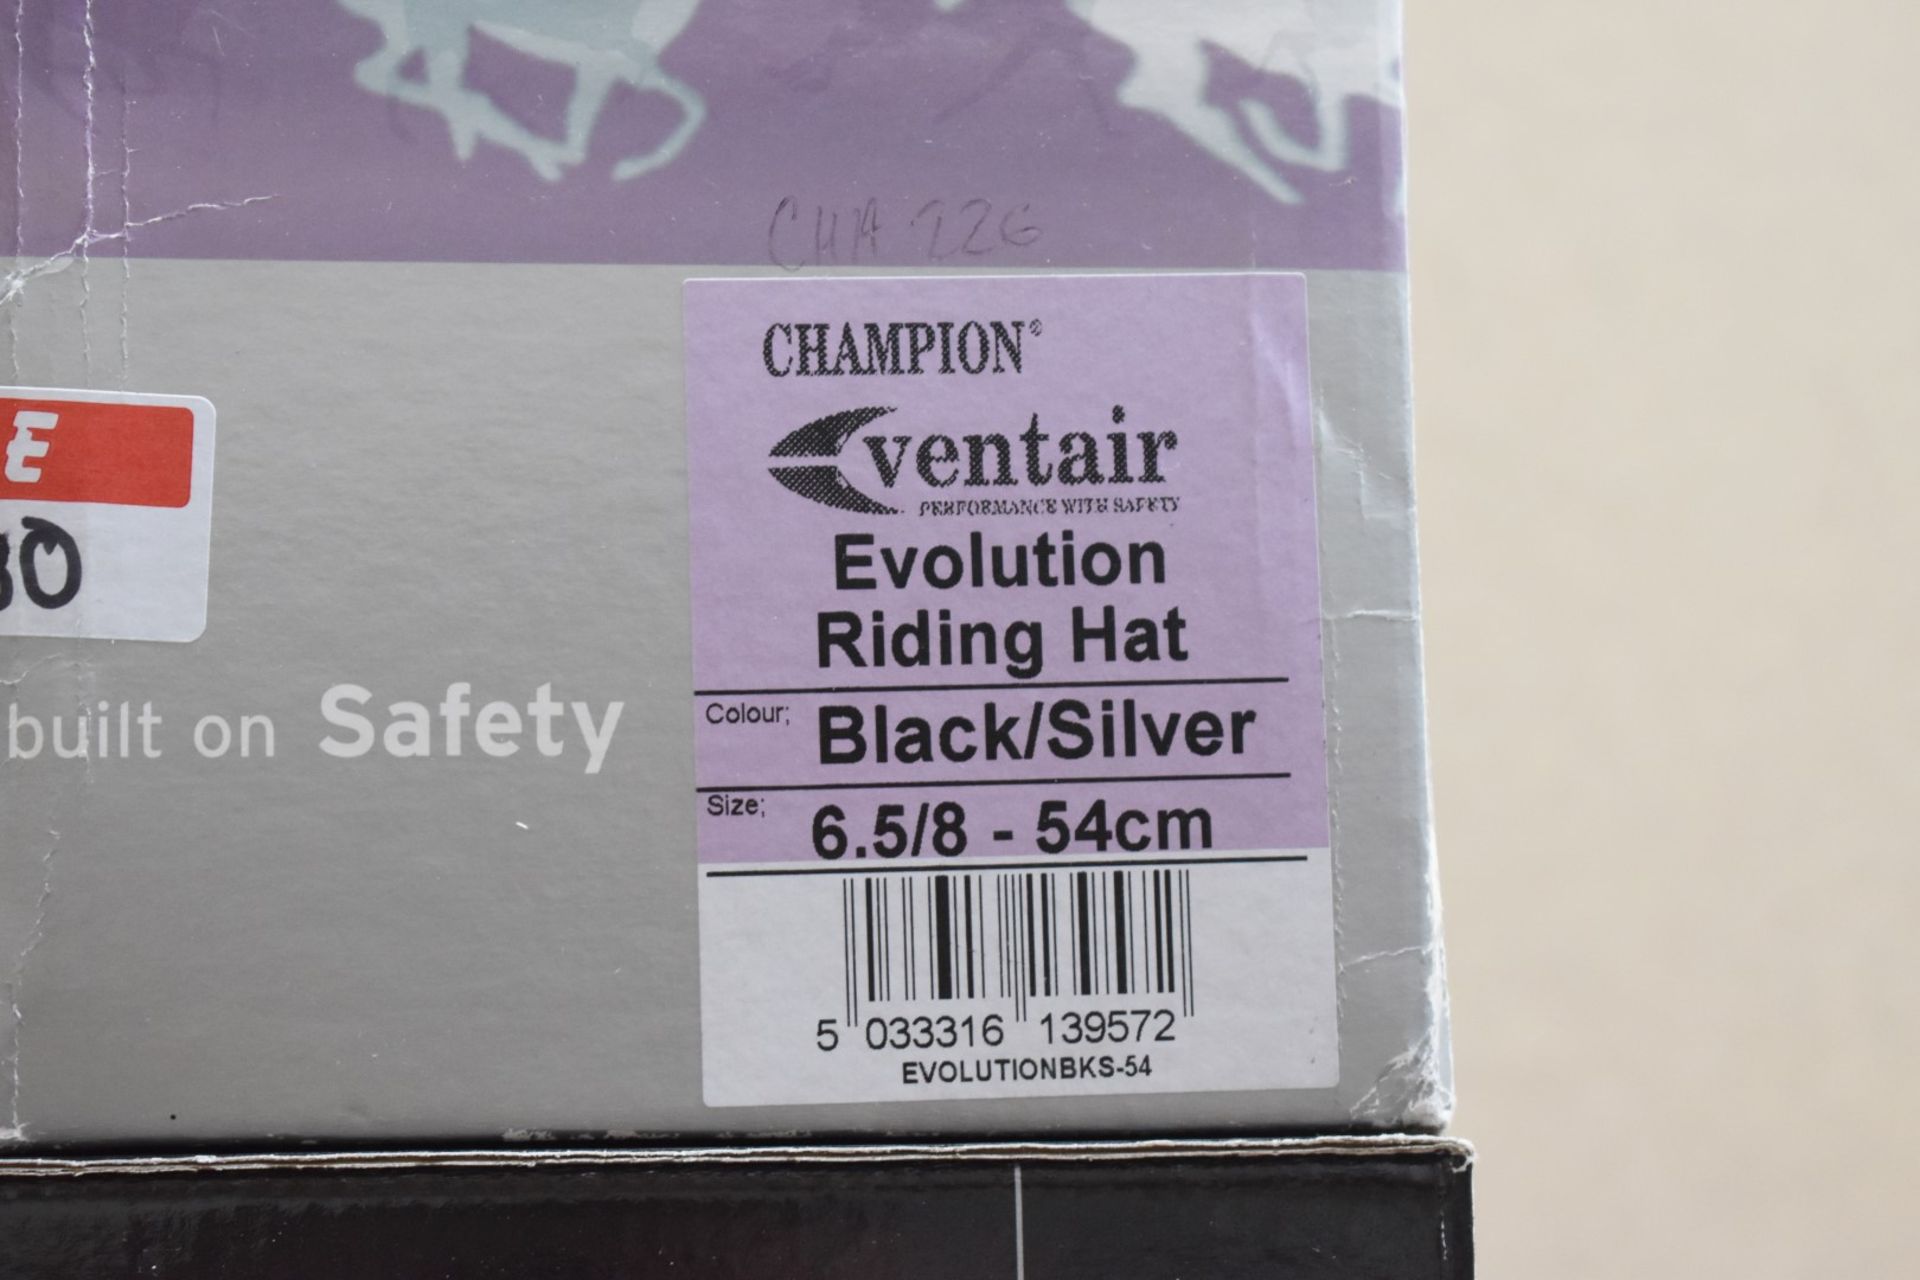 4 x Champion Ventair Evolution Horse Riding Hats - Various Sizes and Colours Included - Unused Boxed - Image 4 of 11